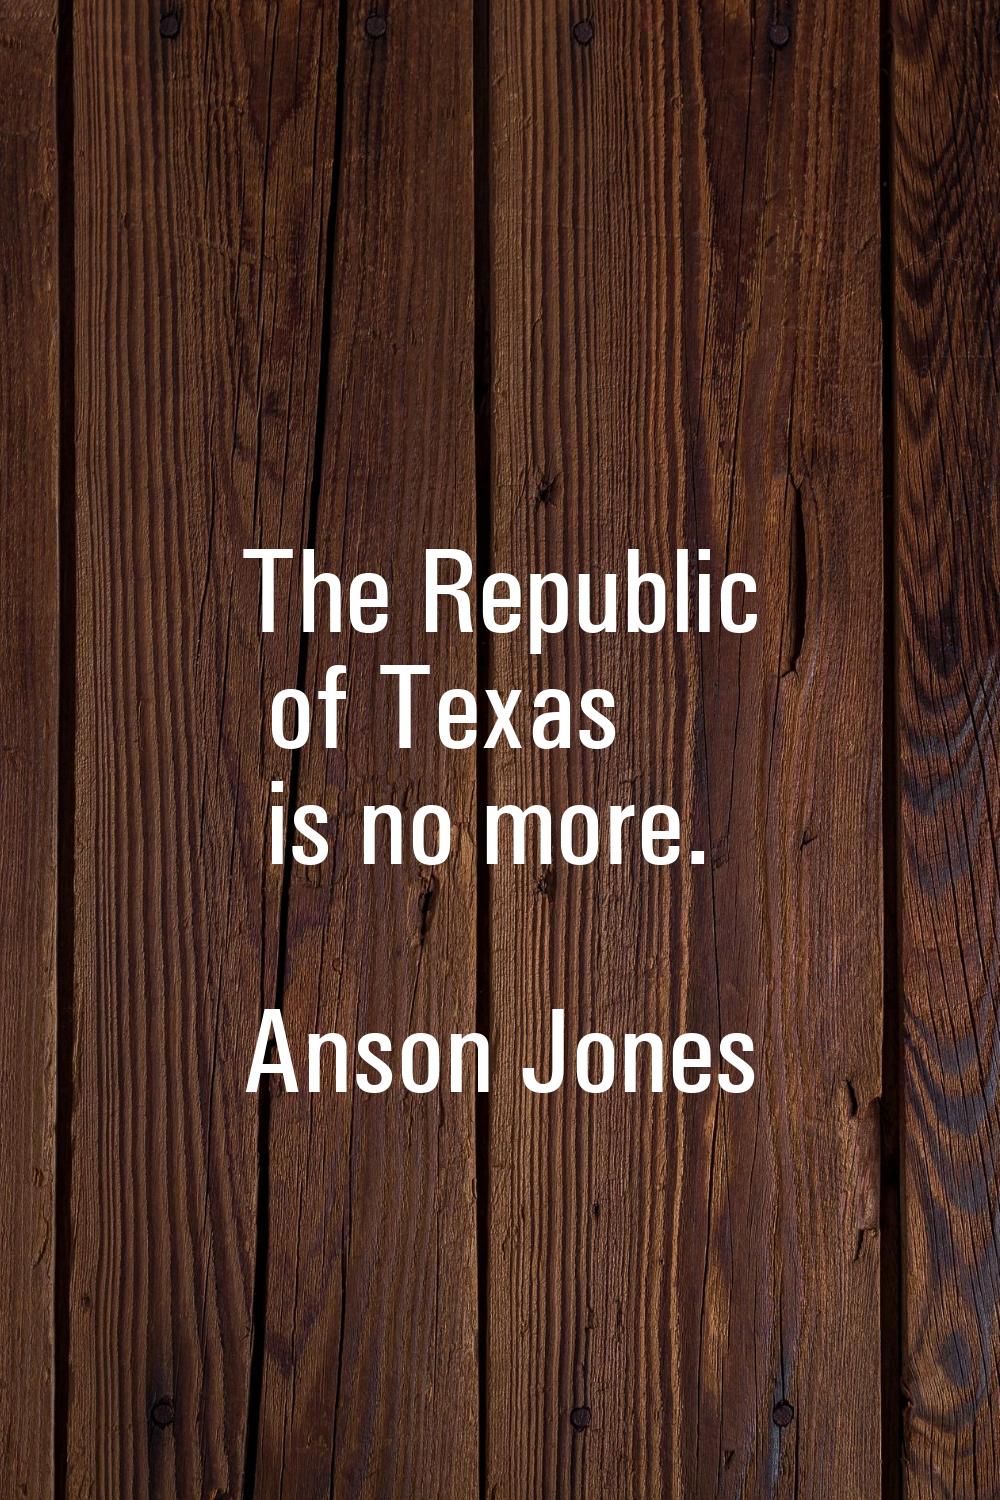 The Republic of Texas is no more.